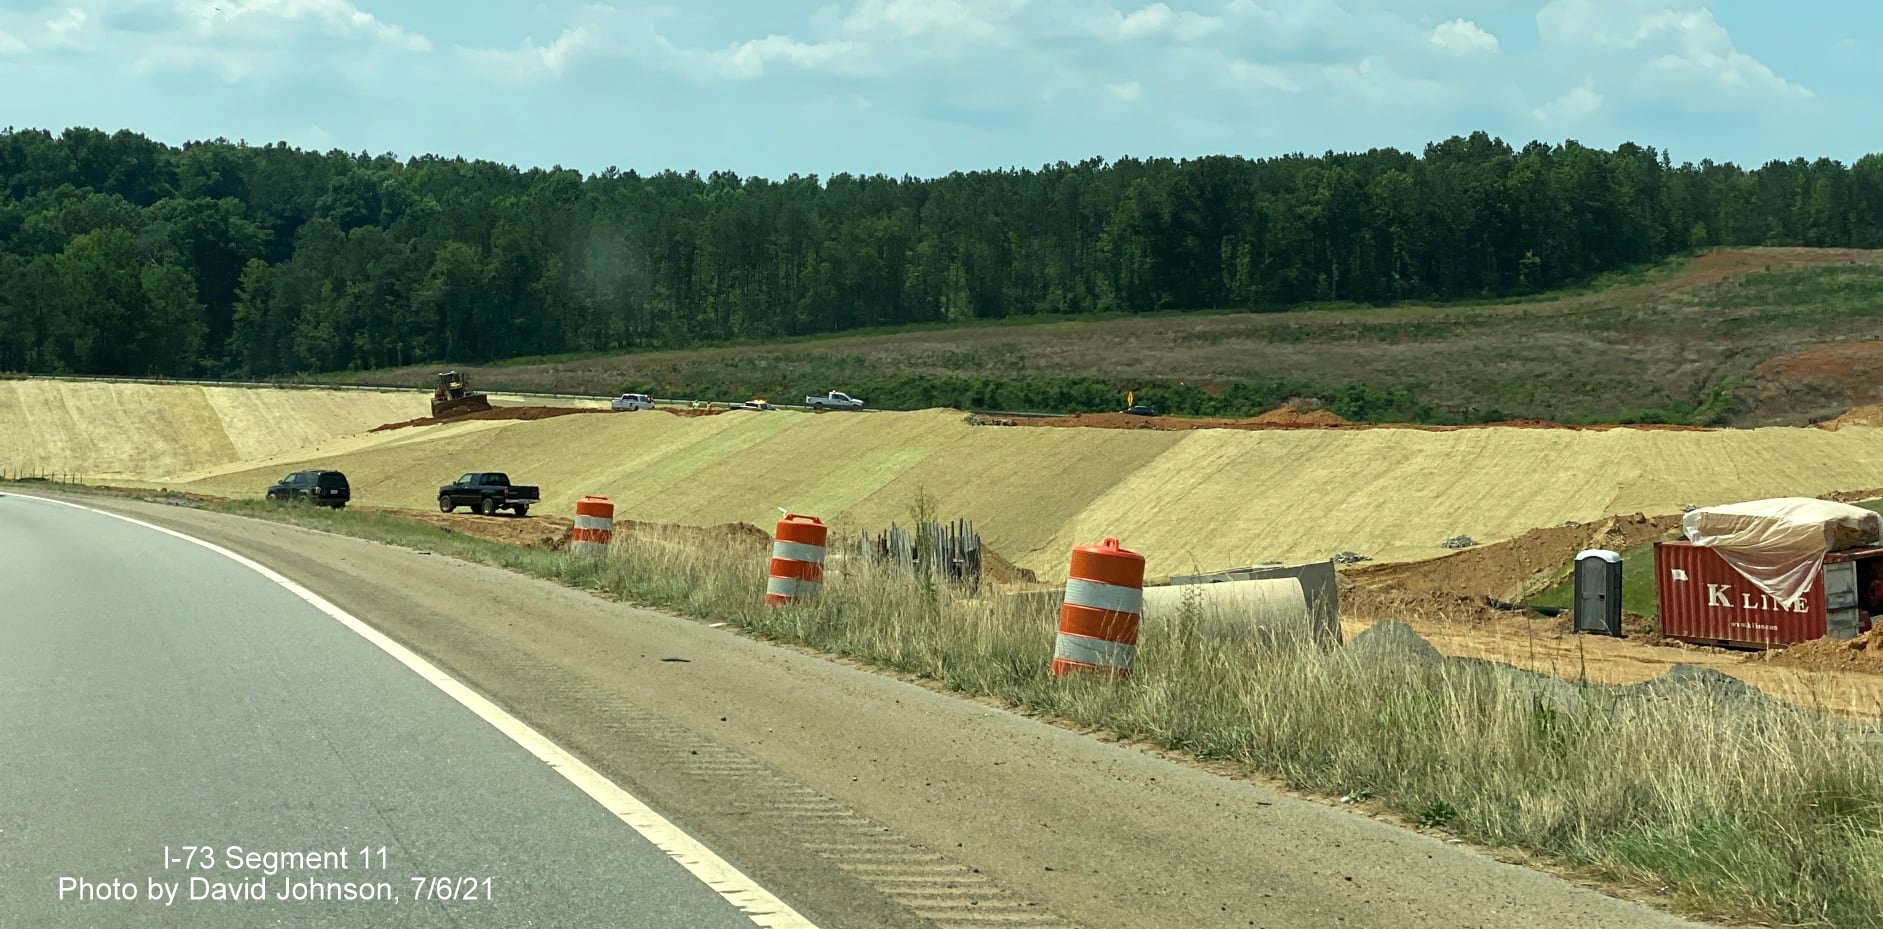 Image of land cleared for future I-73/I-74 Rockingham Bypass interchange as seen from 
        US 74 West, by David Johnson, July 2021